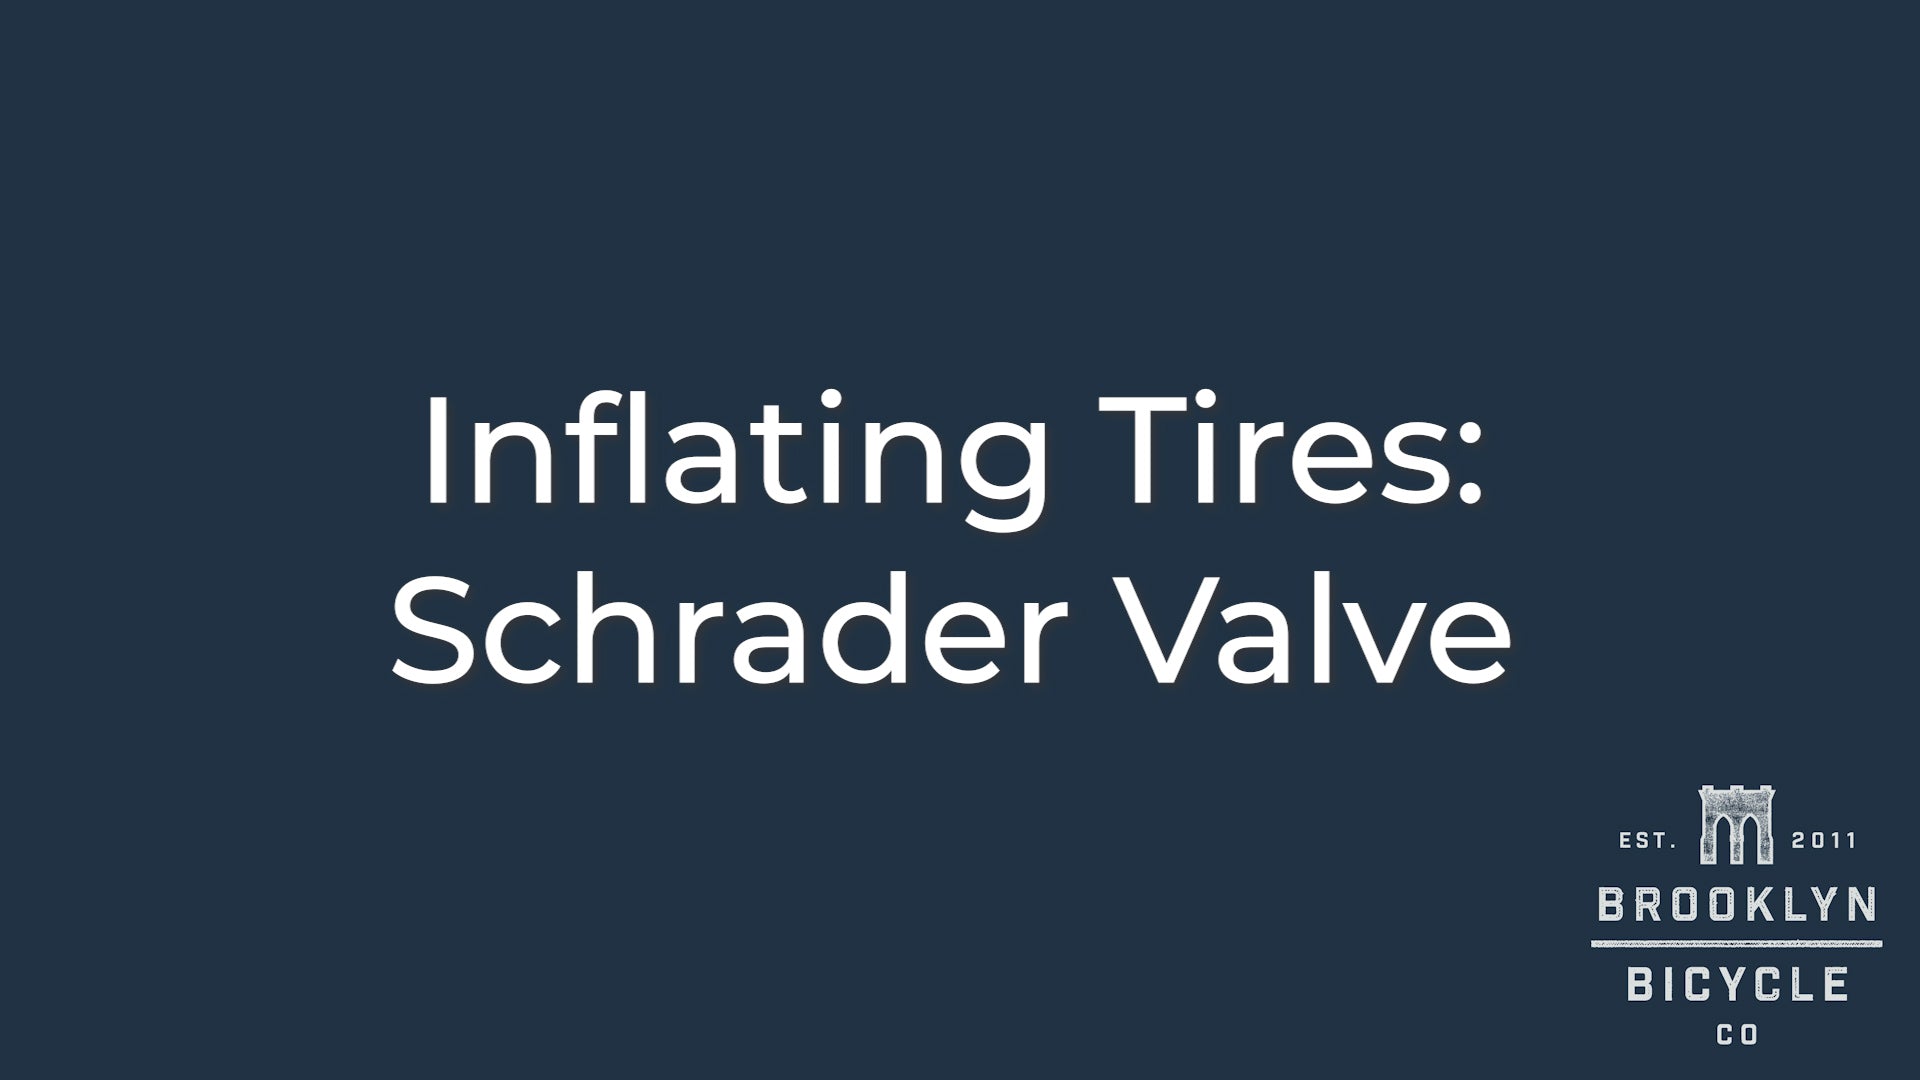 Video: How to Inflate Schrader Valve Tires